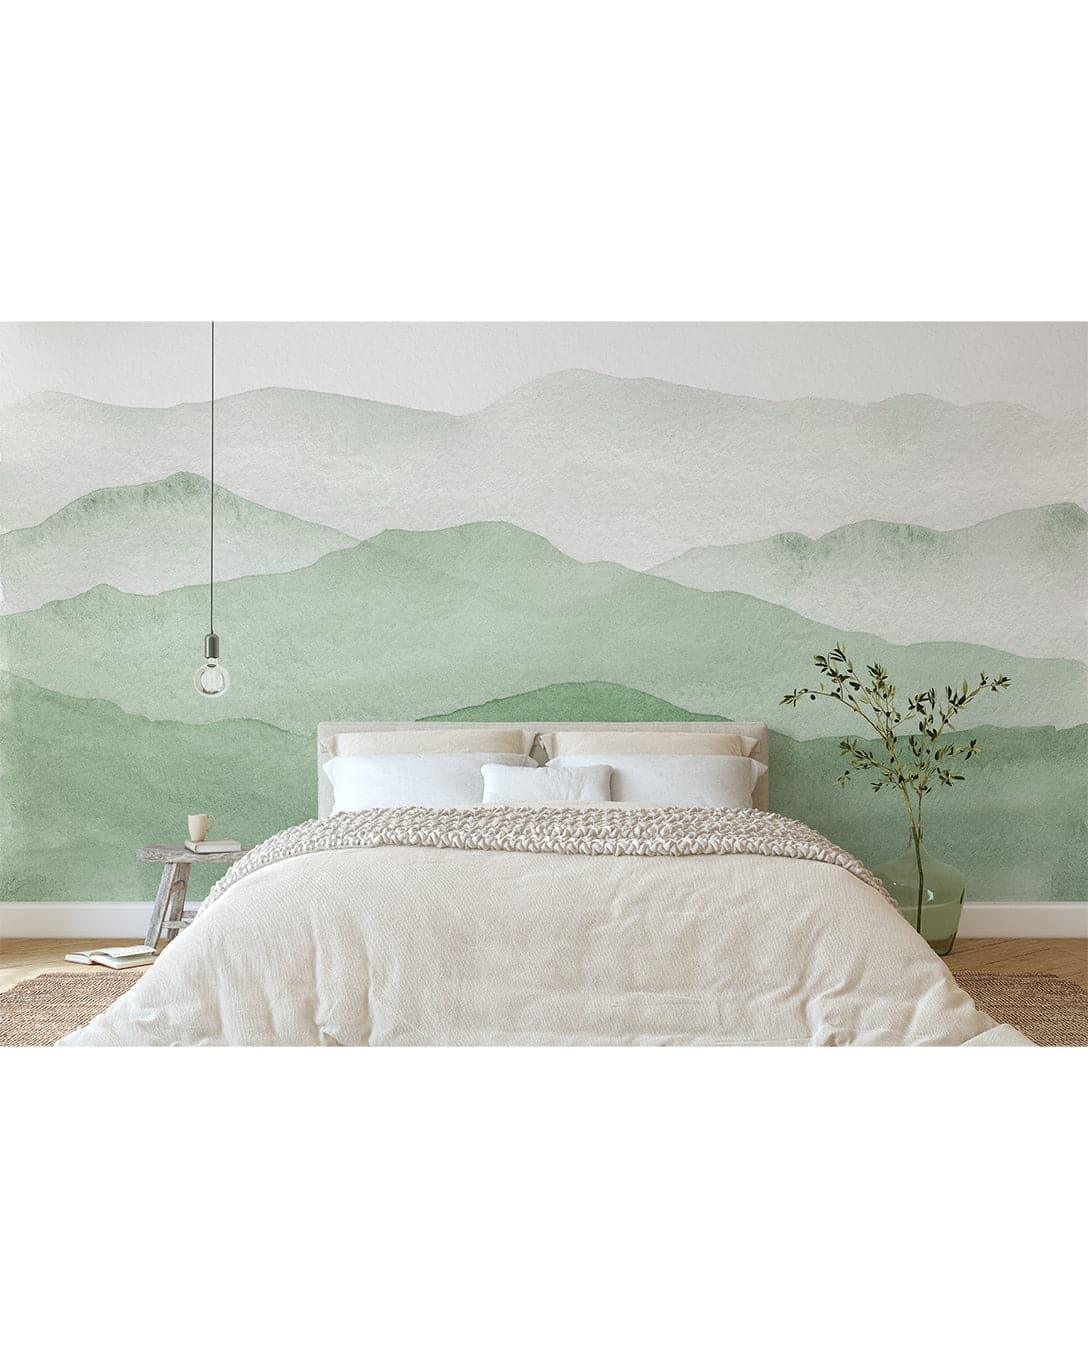 Watercolor Green Abstract Mountains Mural Wall Decal Watercolor Green Abstract Mountains Mural Wall Decal Watercolor Green Abstract Mountains Mural Wall Decal 